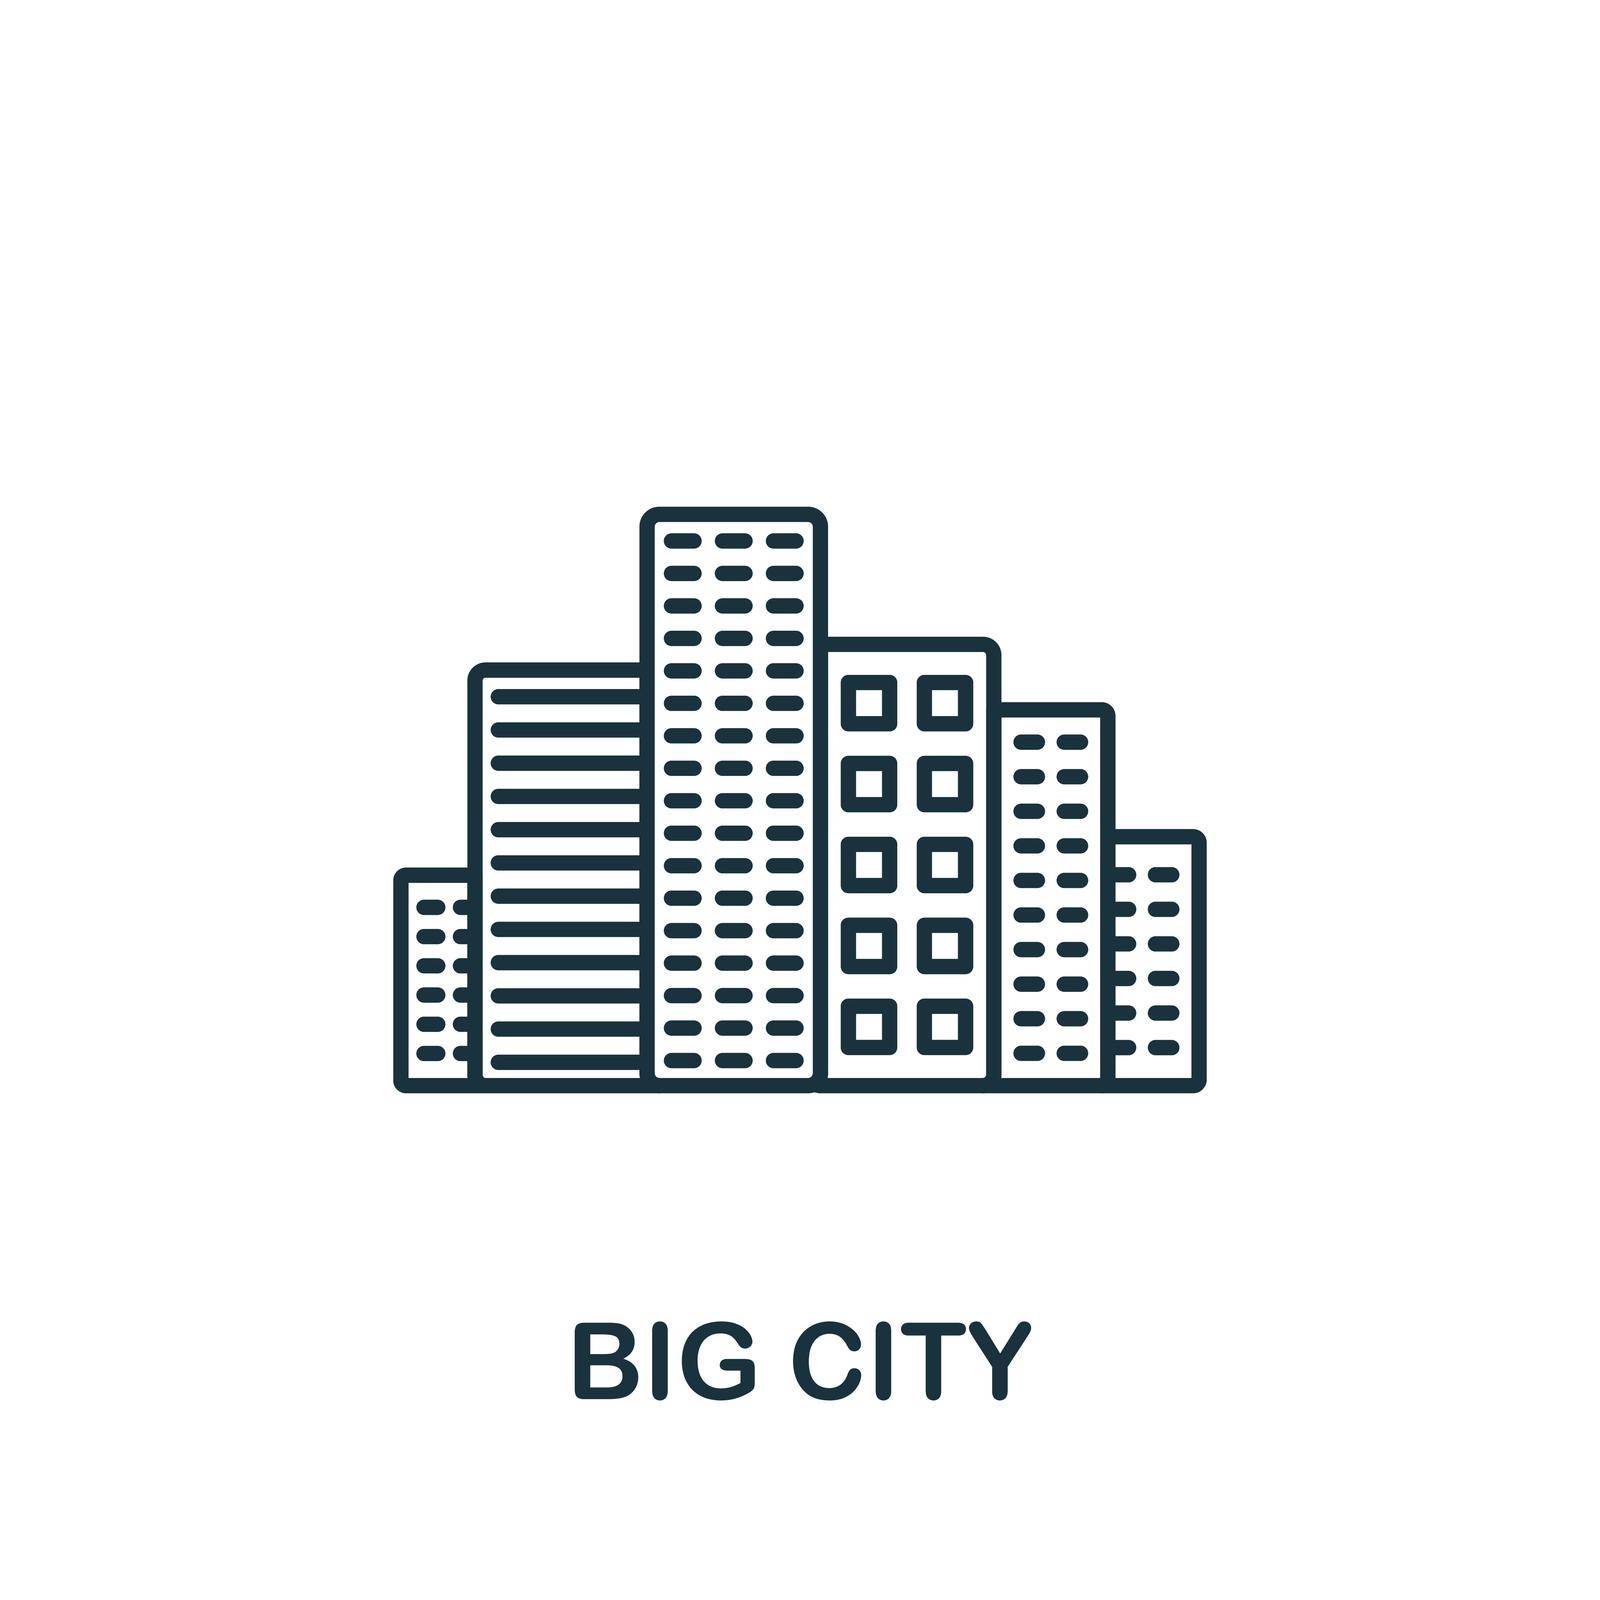 Big City icon. Monochrome simple icon for templates, web design and infographics by simakovavector